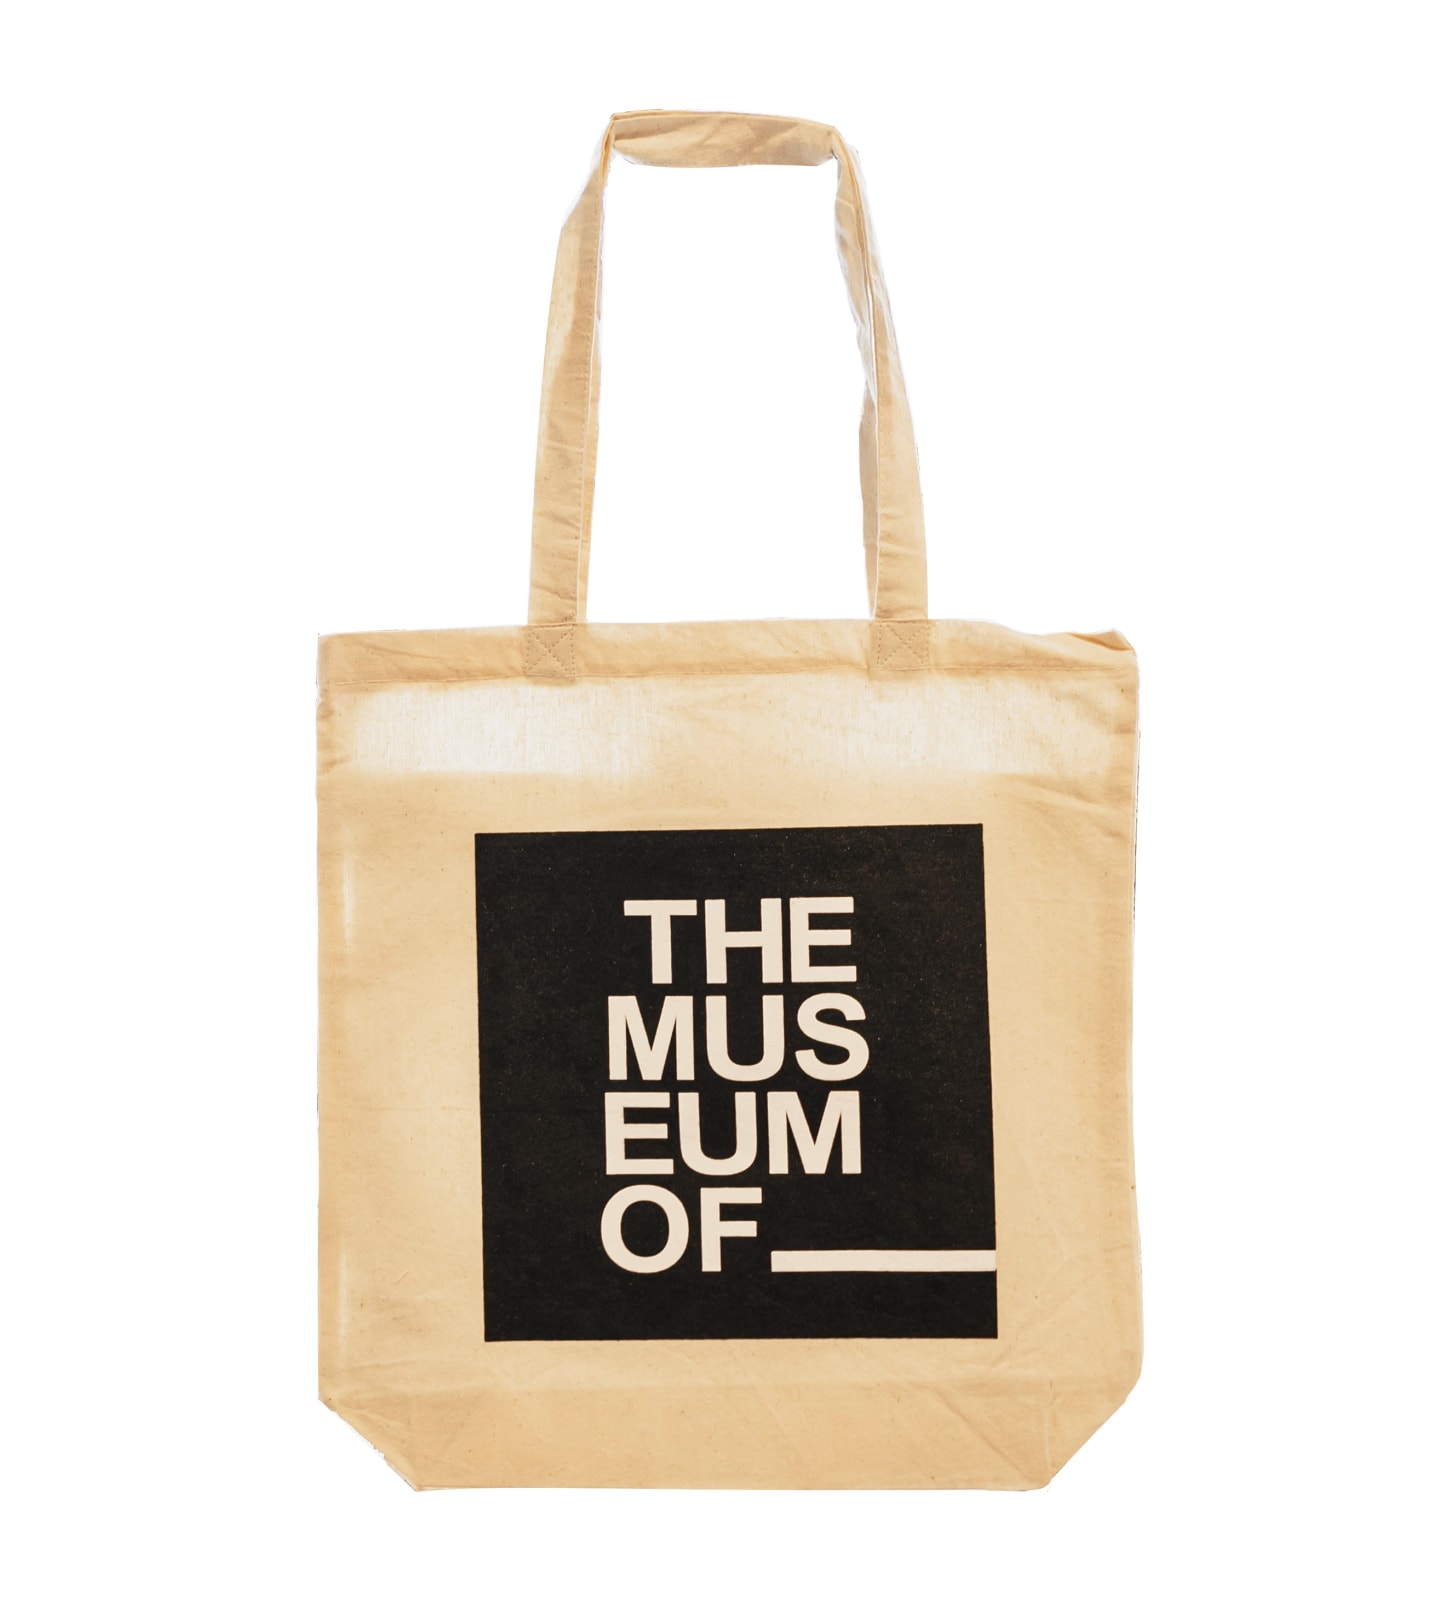 The Museum Of __ Tote Bags | Quint Gallery